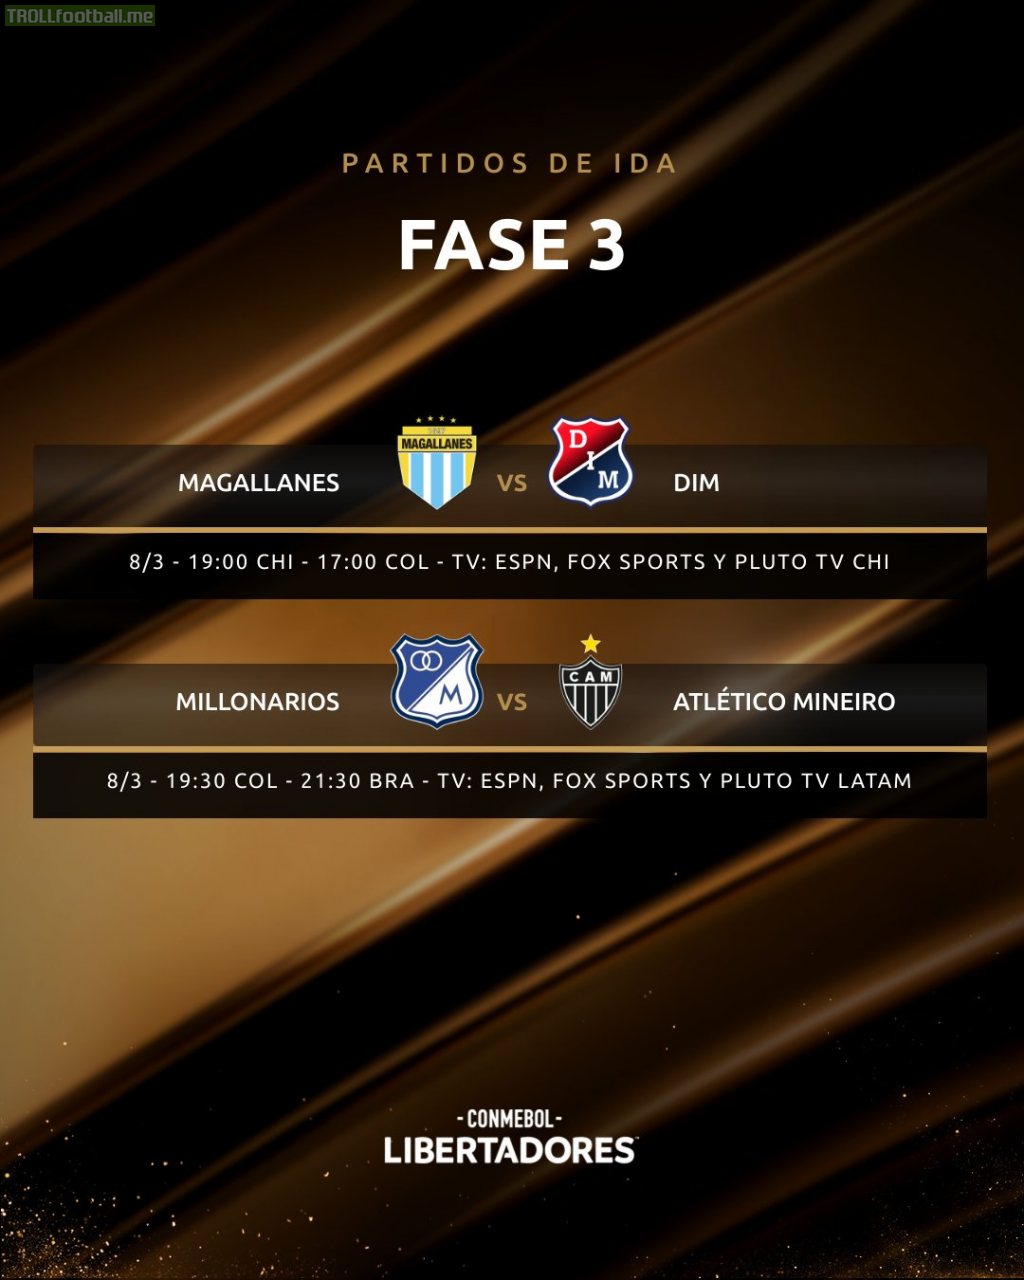 Schedule for today's Copa Libertadores stage 3 matches (first leg)